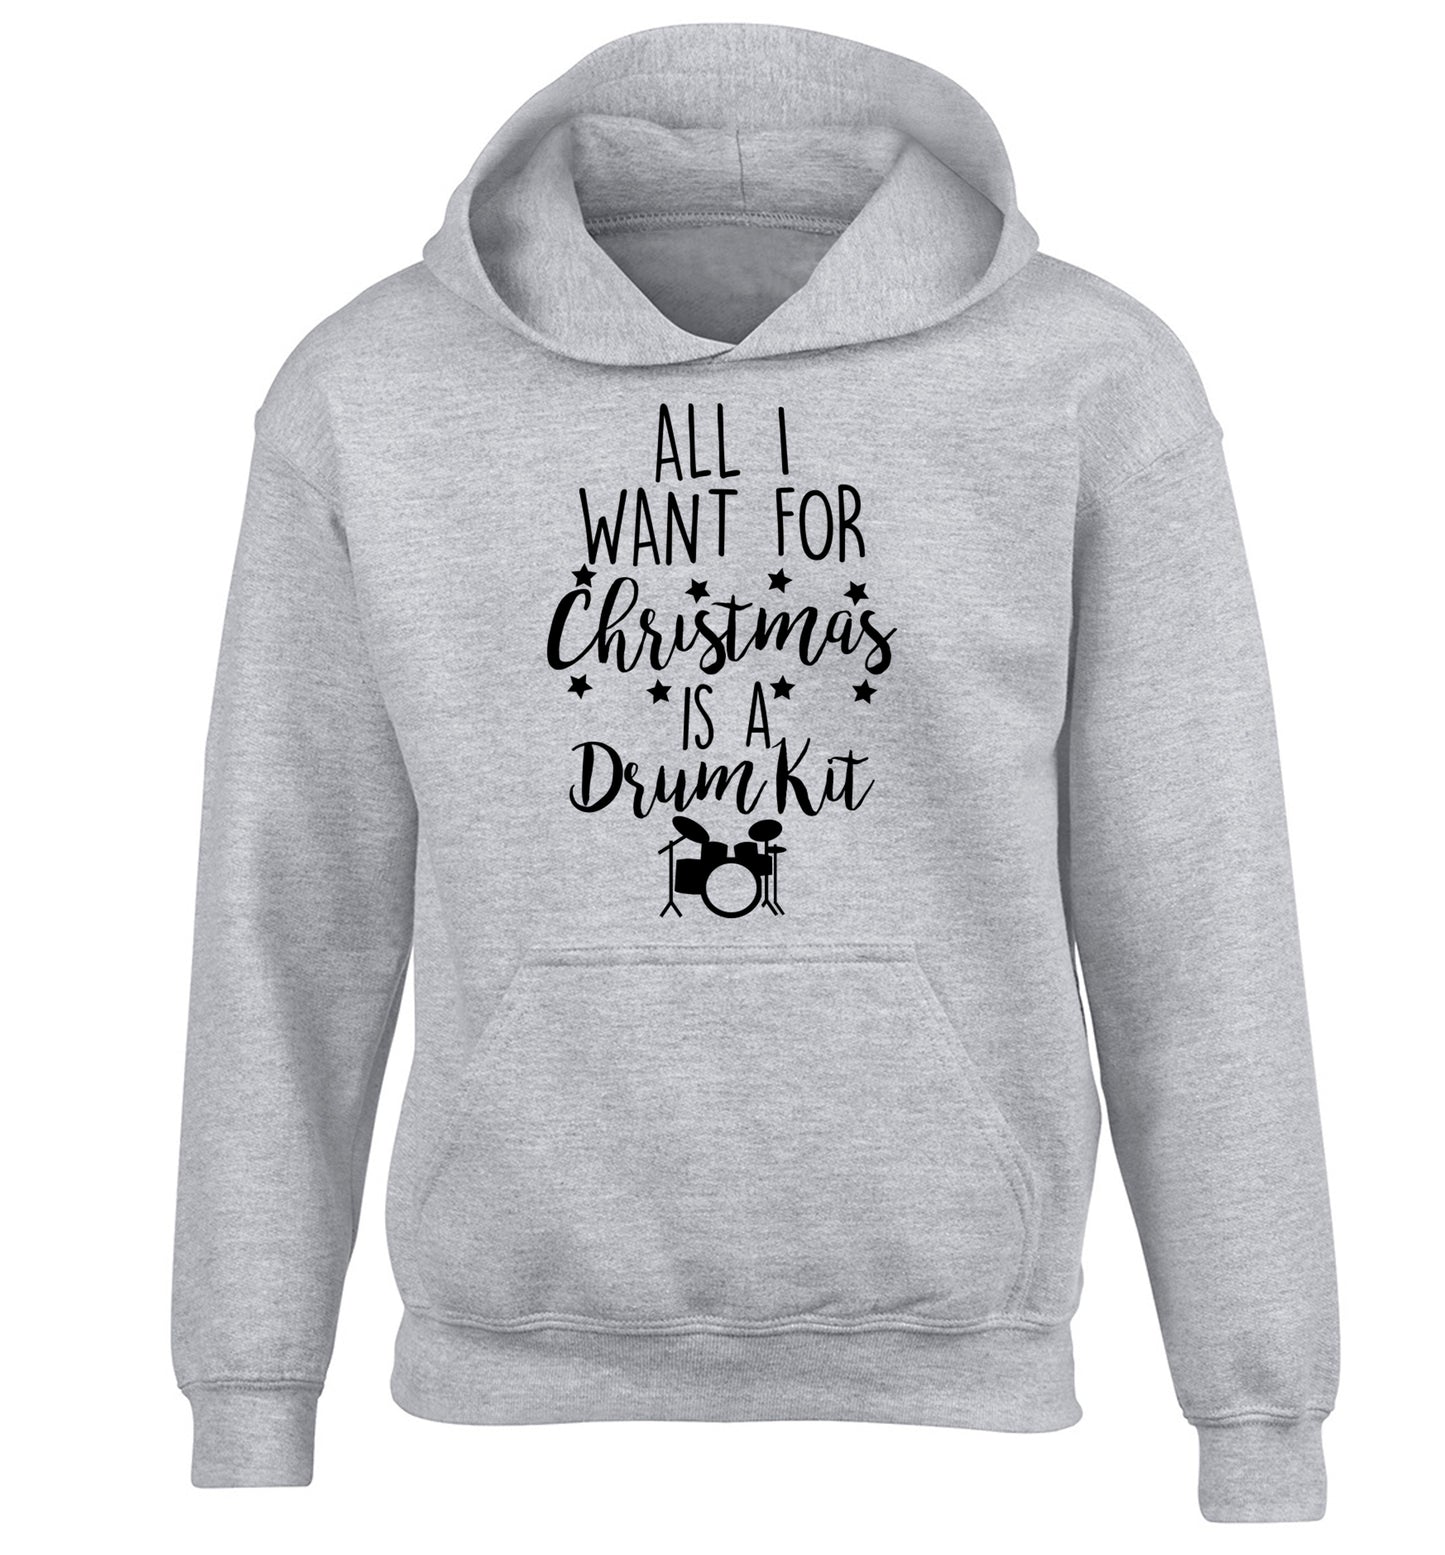 All I want for Christmas is a drum kit! children's grey hoodie 12-14 Years